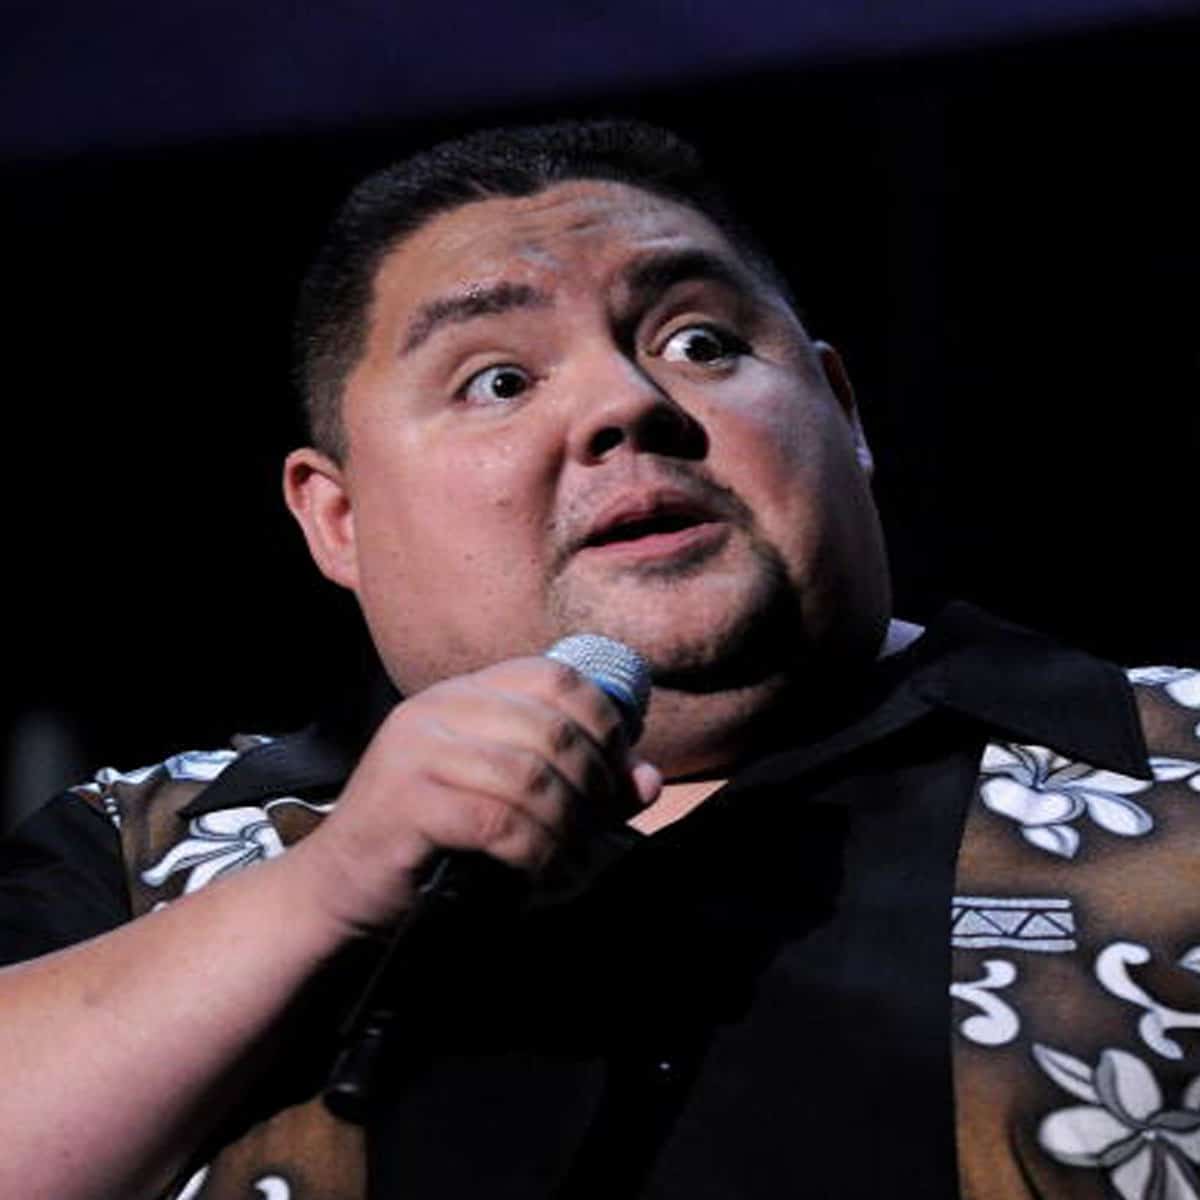 Gabriel Iglesias Net Worth: How Rich Is the Comic in 2022?